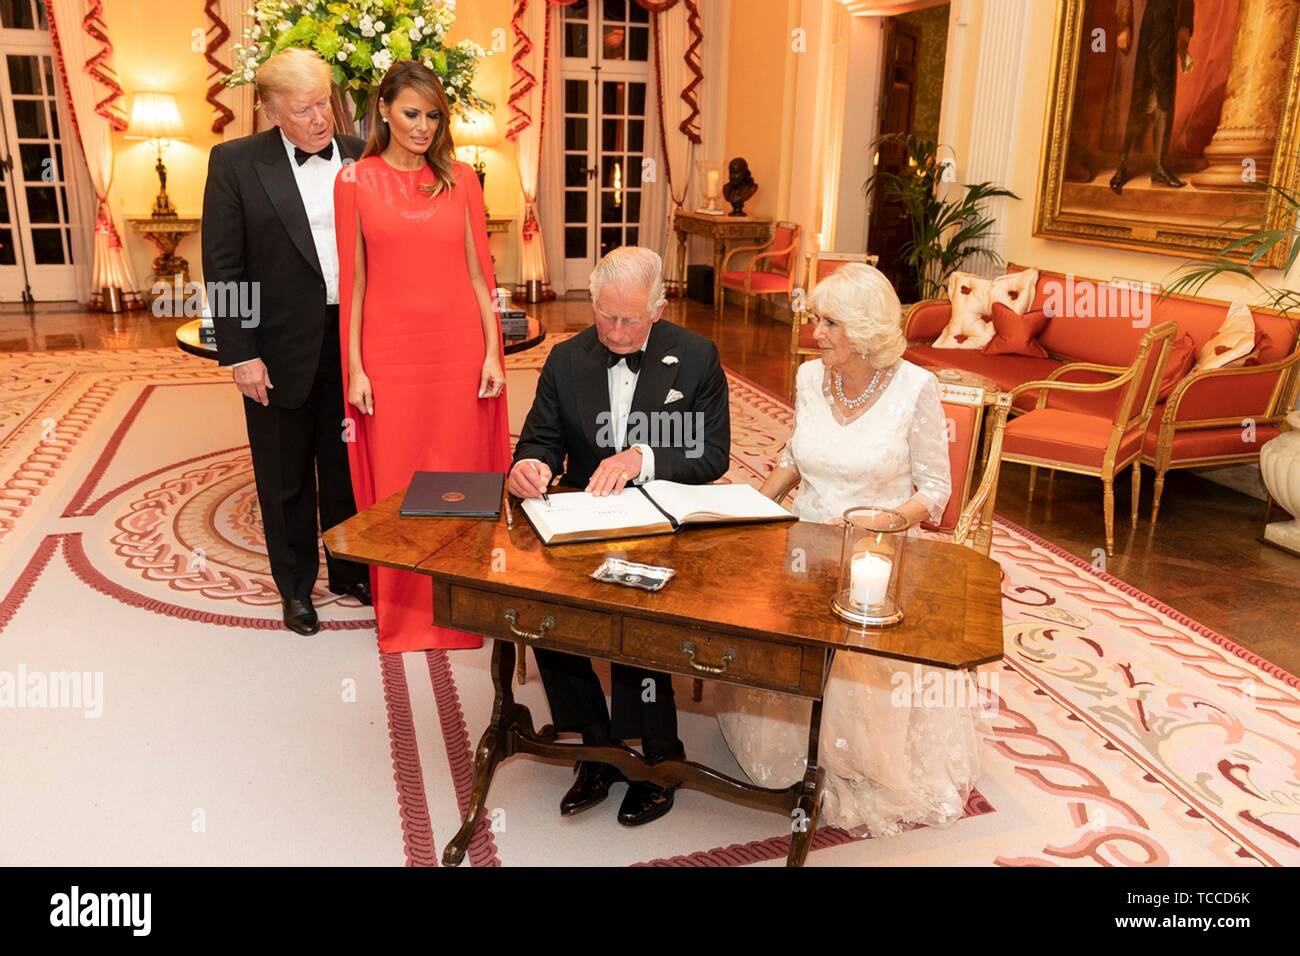 U.S President Donald Trump and First Lady Melania Trump look on as Prince of Wales and the Duchess of Cornwall sign the guestbook during a gala at Winfield House hosted by the Trumps June 4, 2019 in London, England. Stock Photo